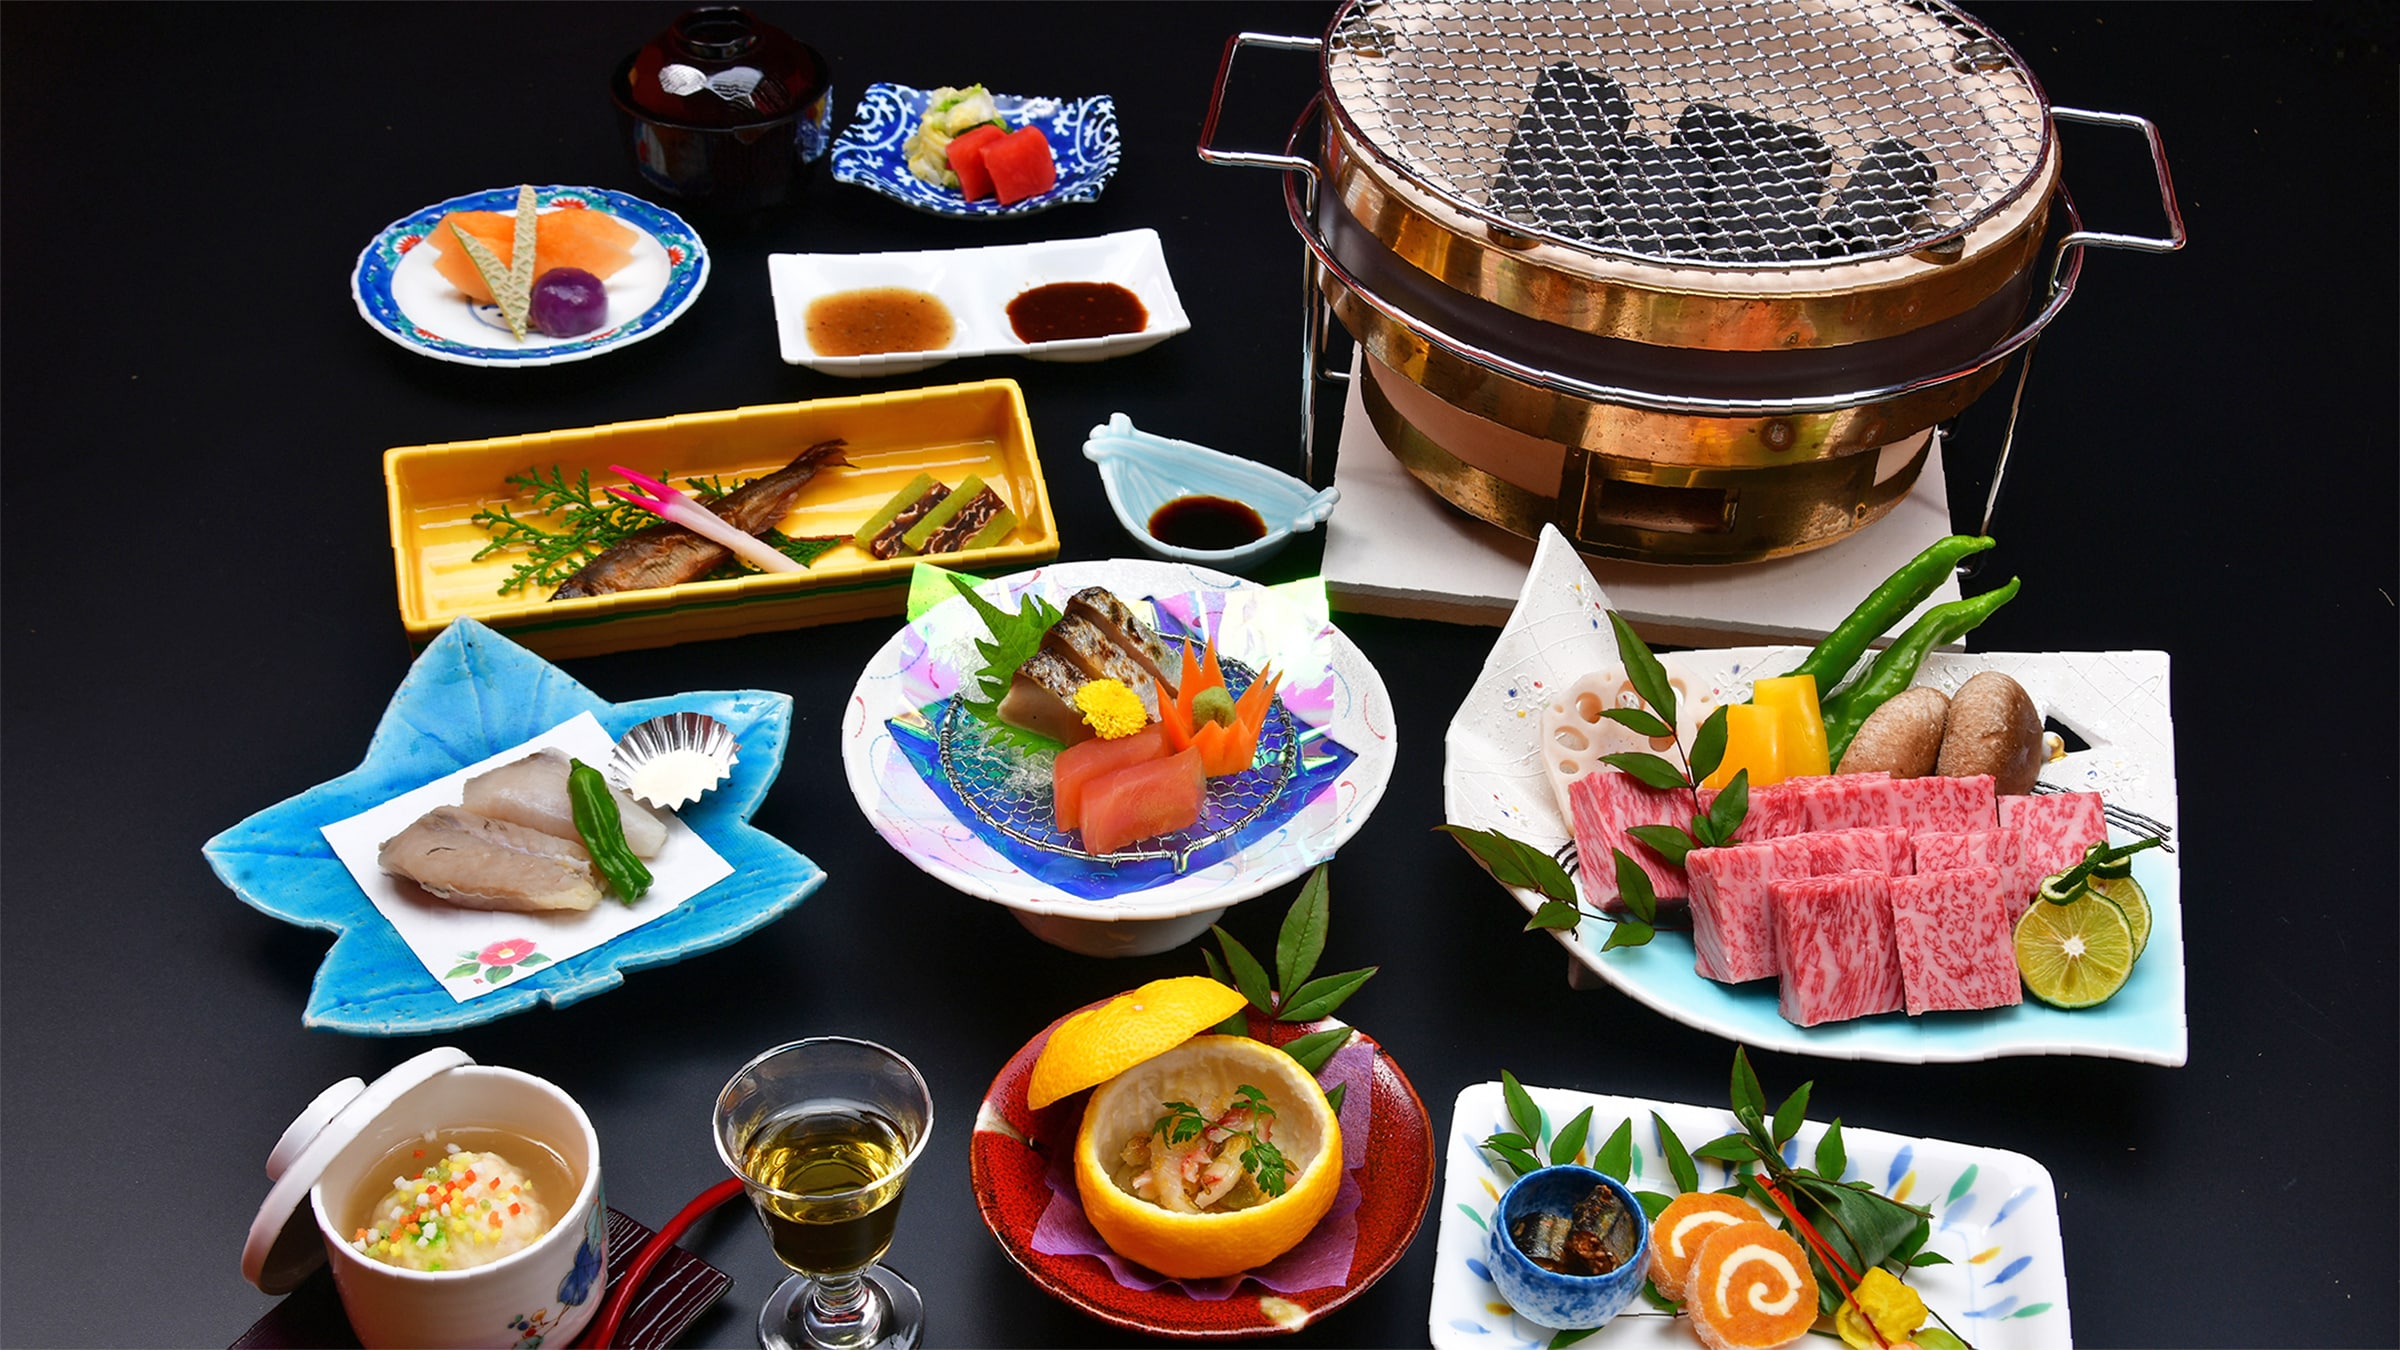 ◆Meal: Charcoal-grilled kaiseki meal